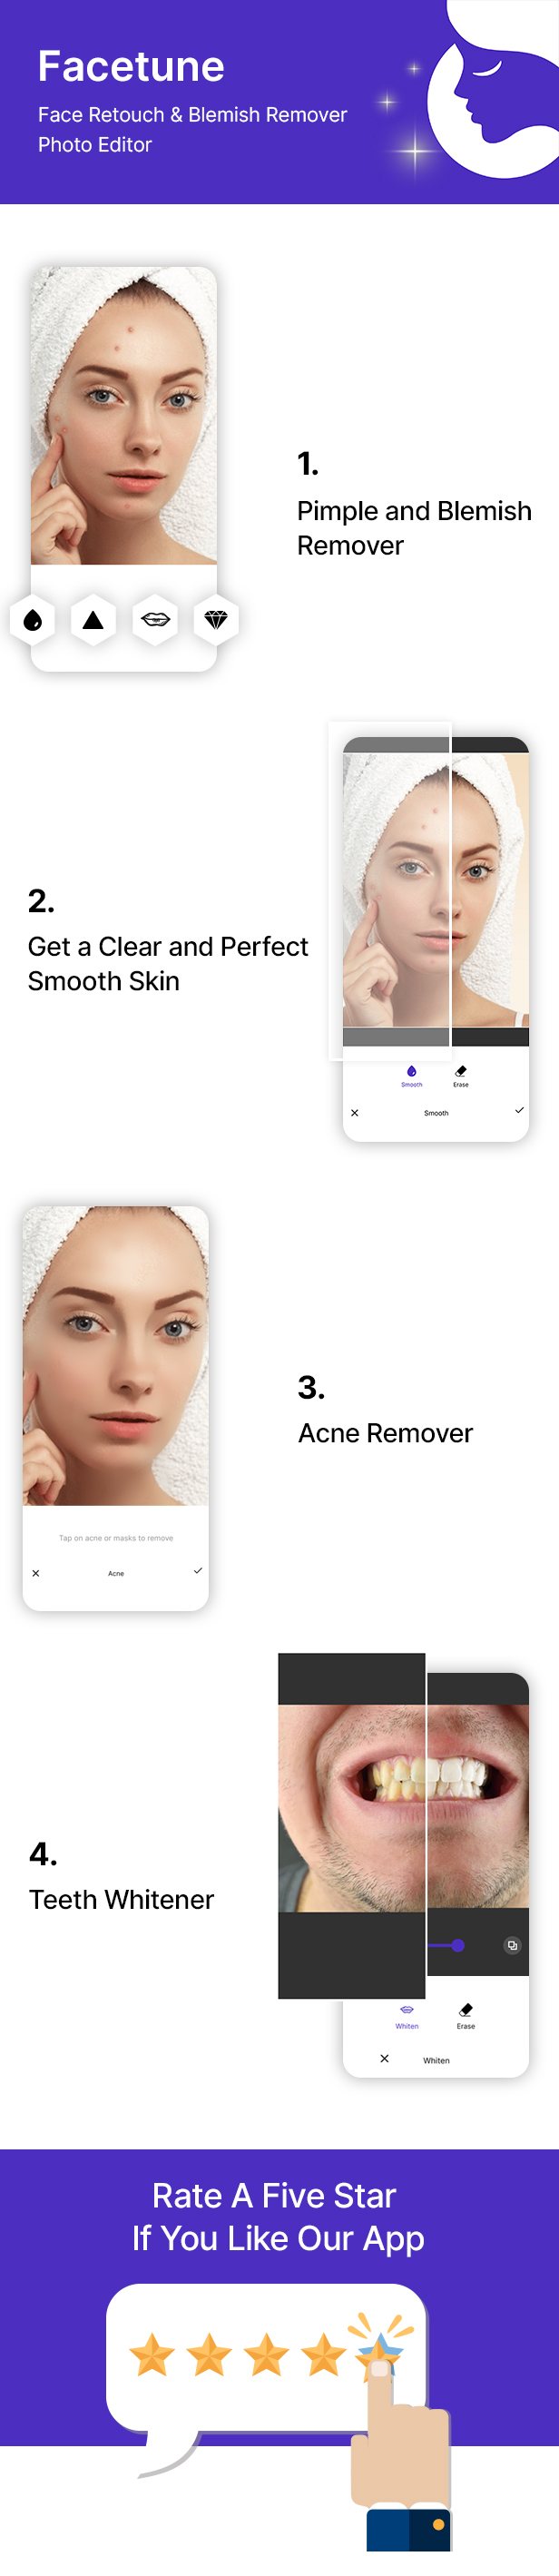 Facetune - Face Retouch & Blemish Remover Photo Editor with Admob Ads - 6